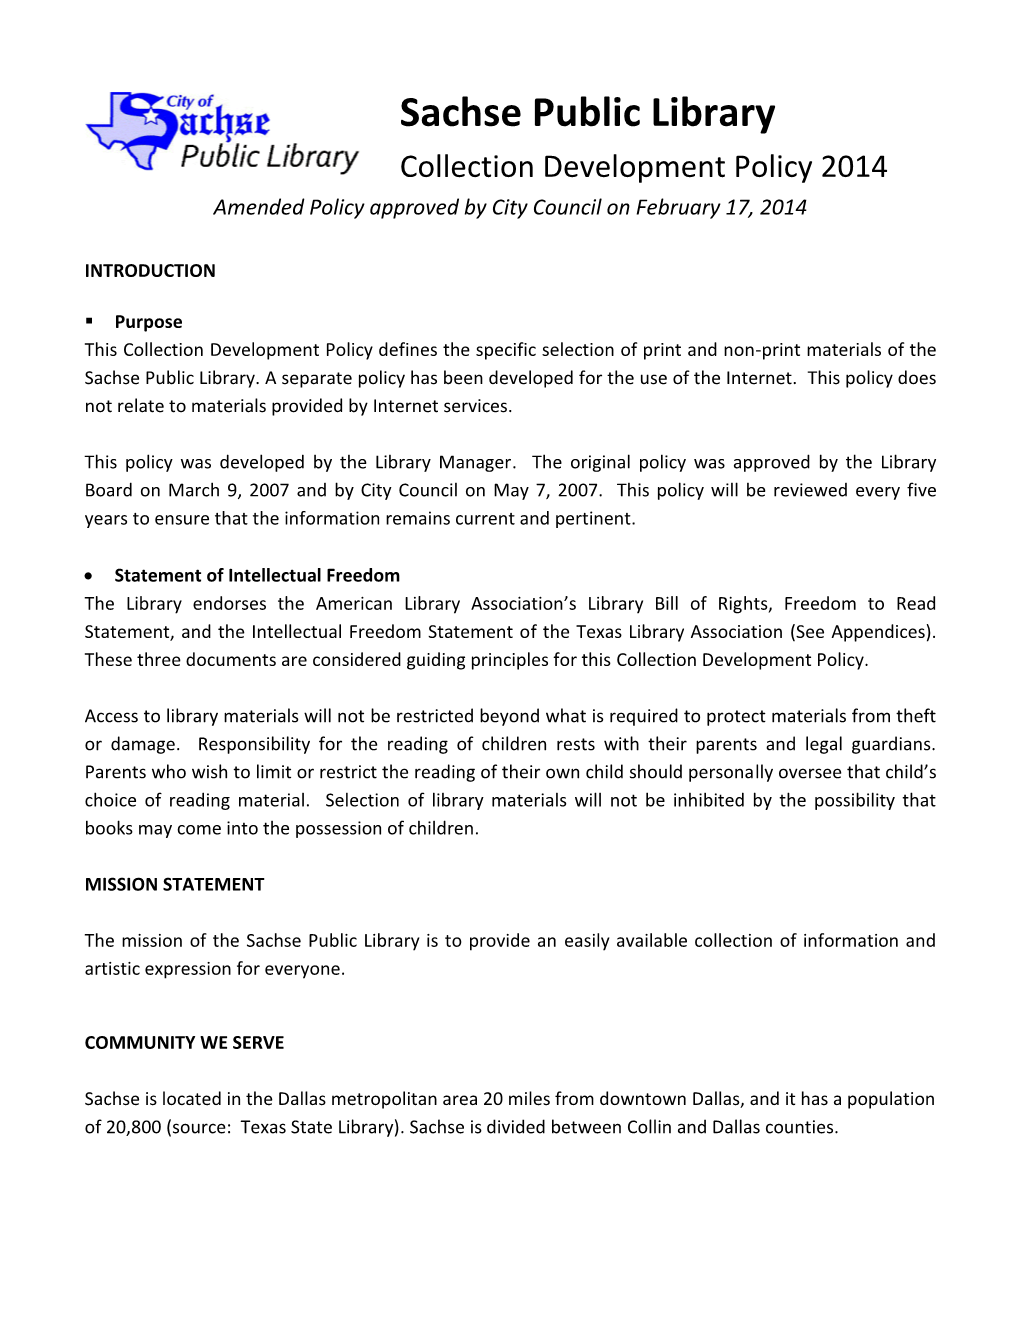 Sachse Public Library Collection Development Policy 2014 Amended Policy Approved by City Council on February 17, 2014